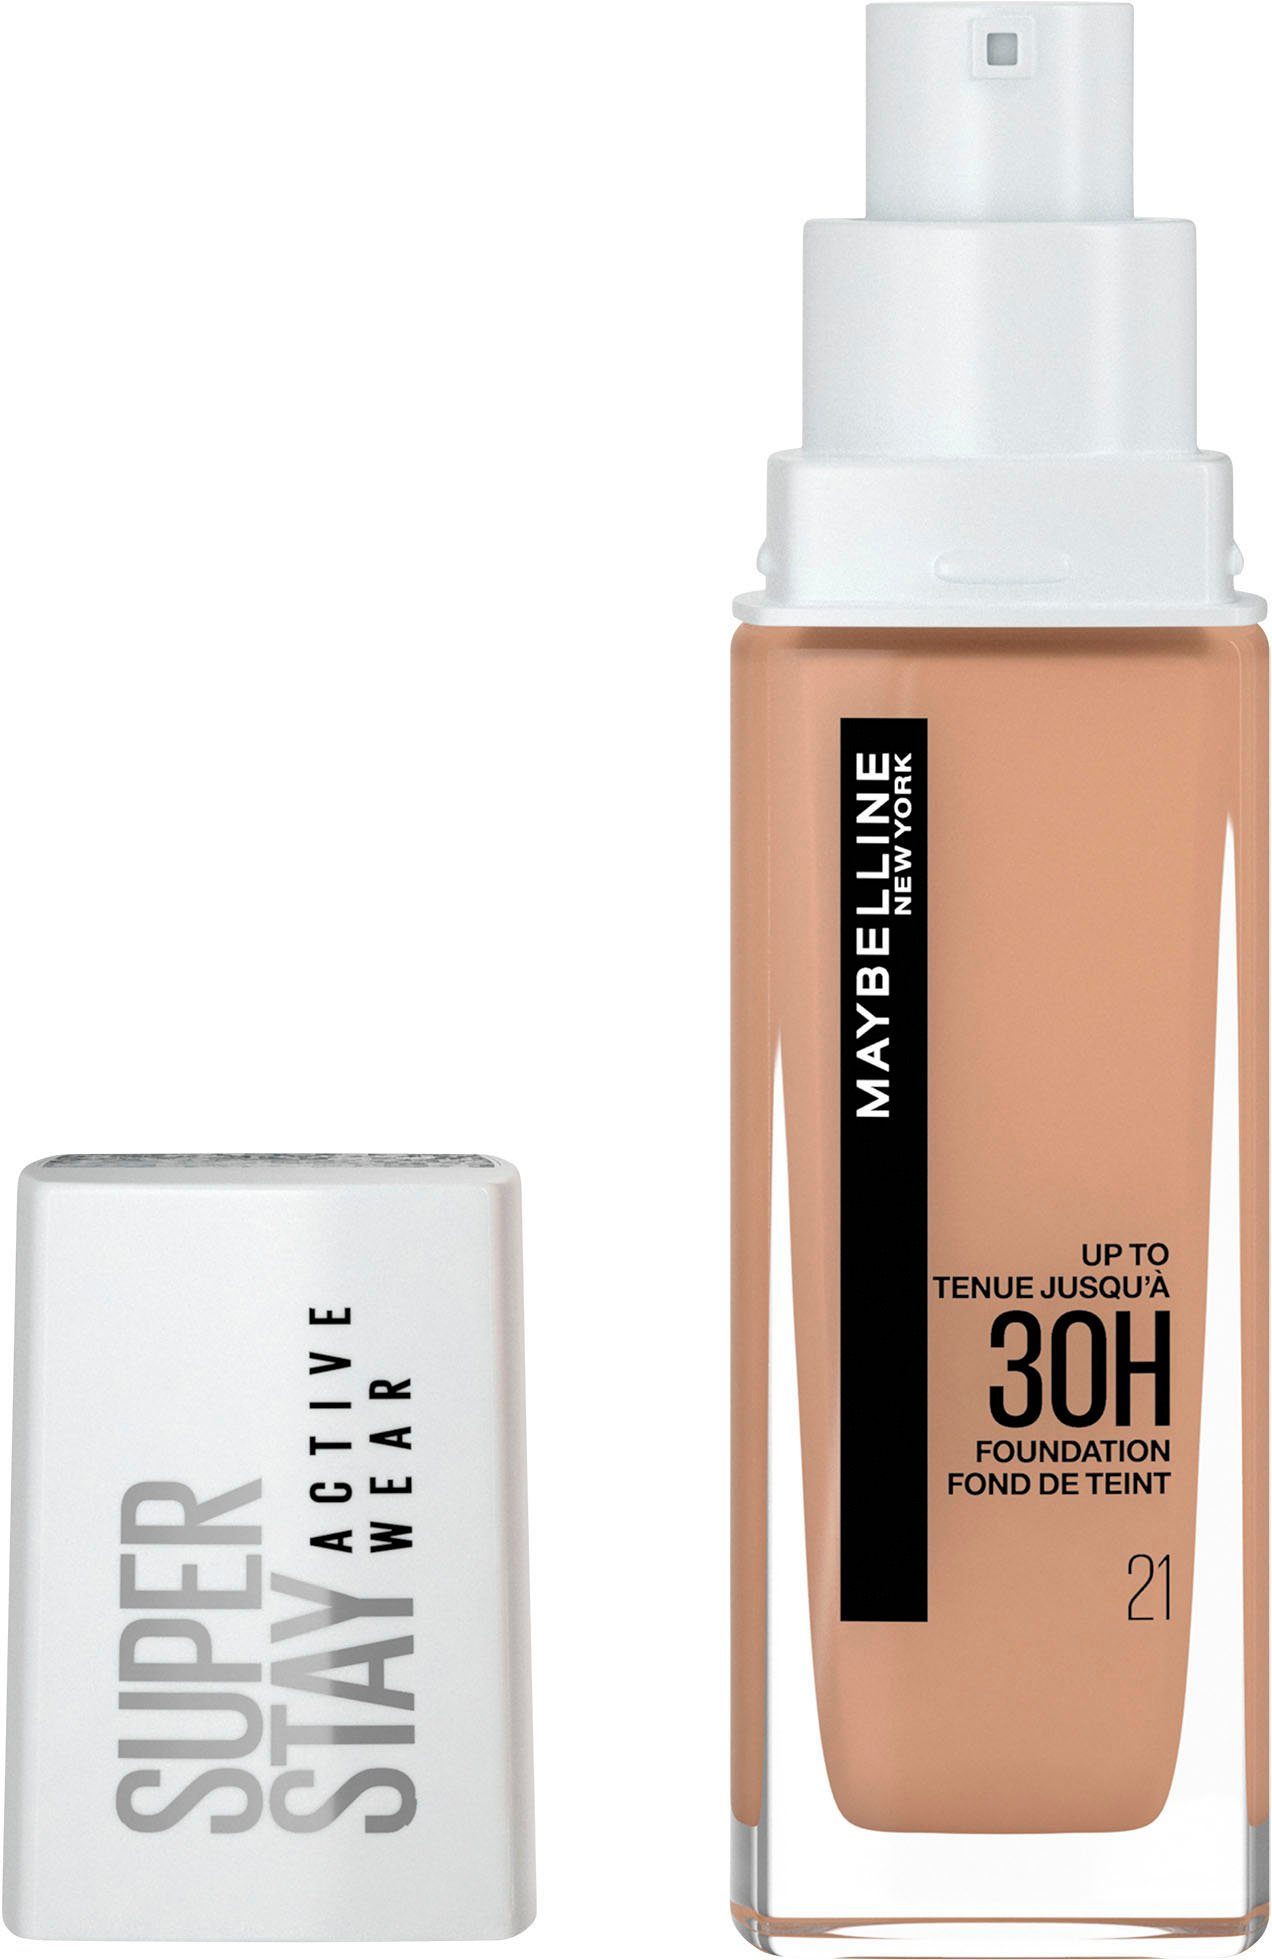 Active YORK Super Beige NEW Foundation MAYBELLINE 21 Wear Stay Nude